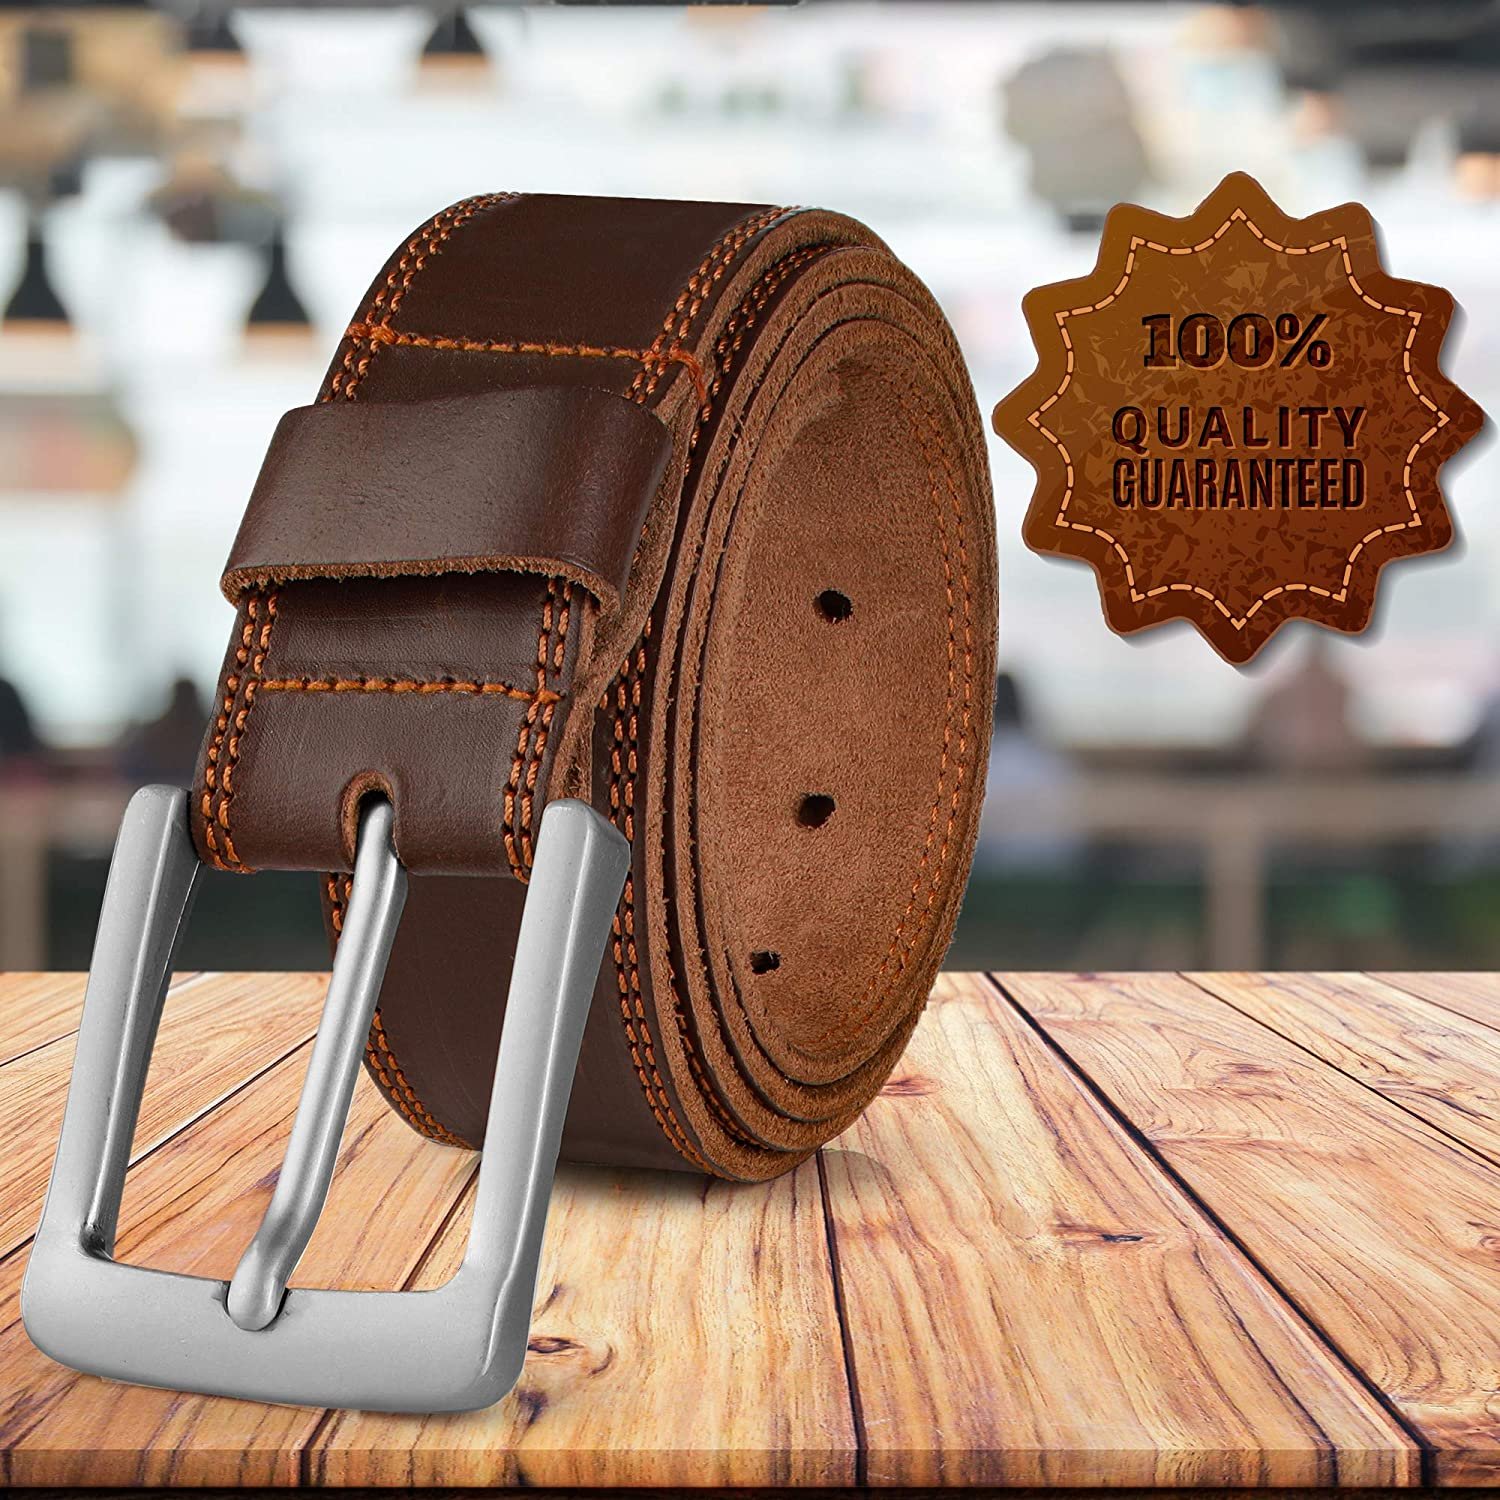 Nabob Leather Men's Leather Belt - Made With Rustic Leather| Two Row Stitching, Handmade In Bourbon Brown Perfect For Jeans (Size 30" (76 cm) - image 3 of 7